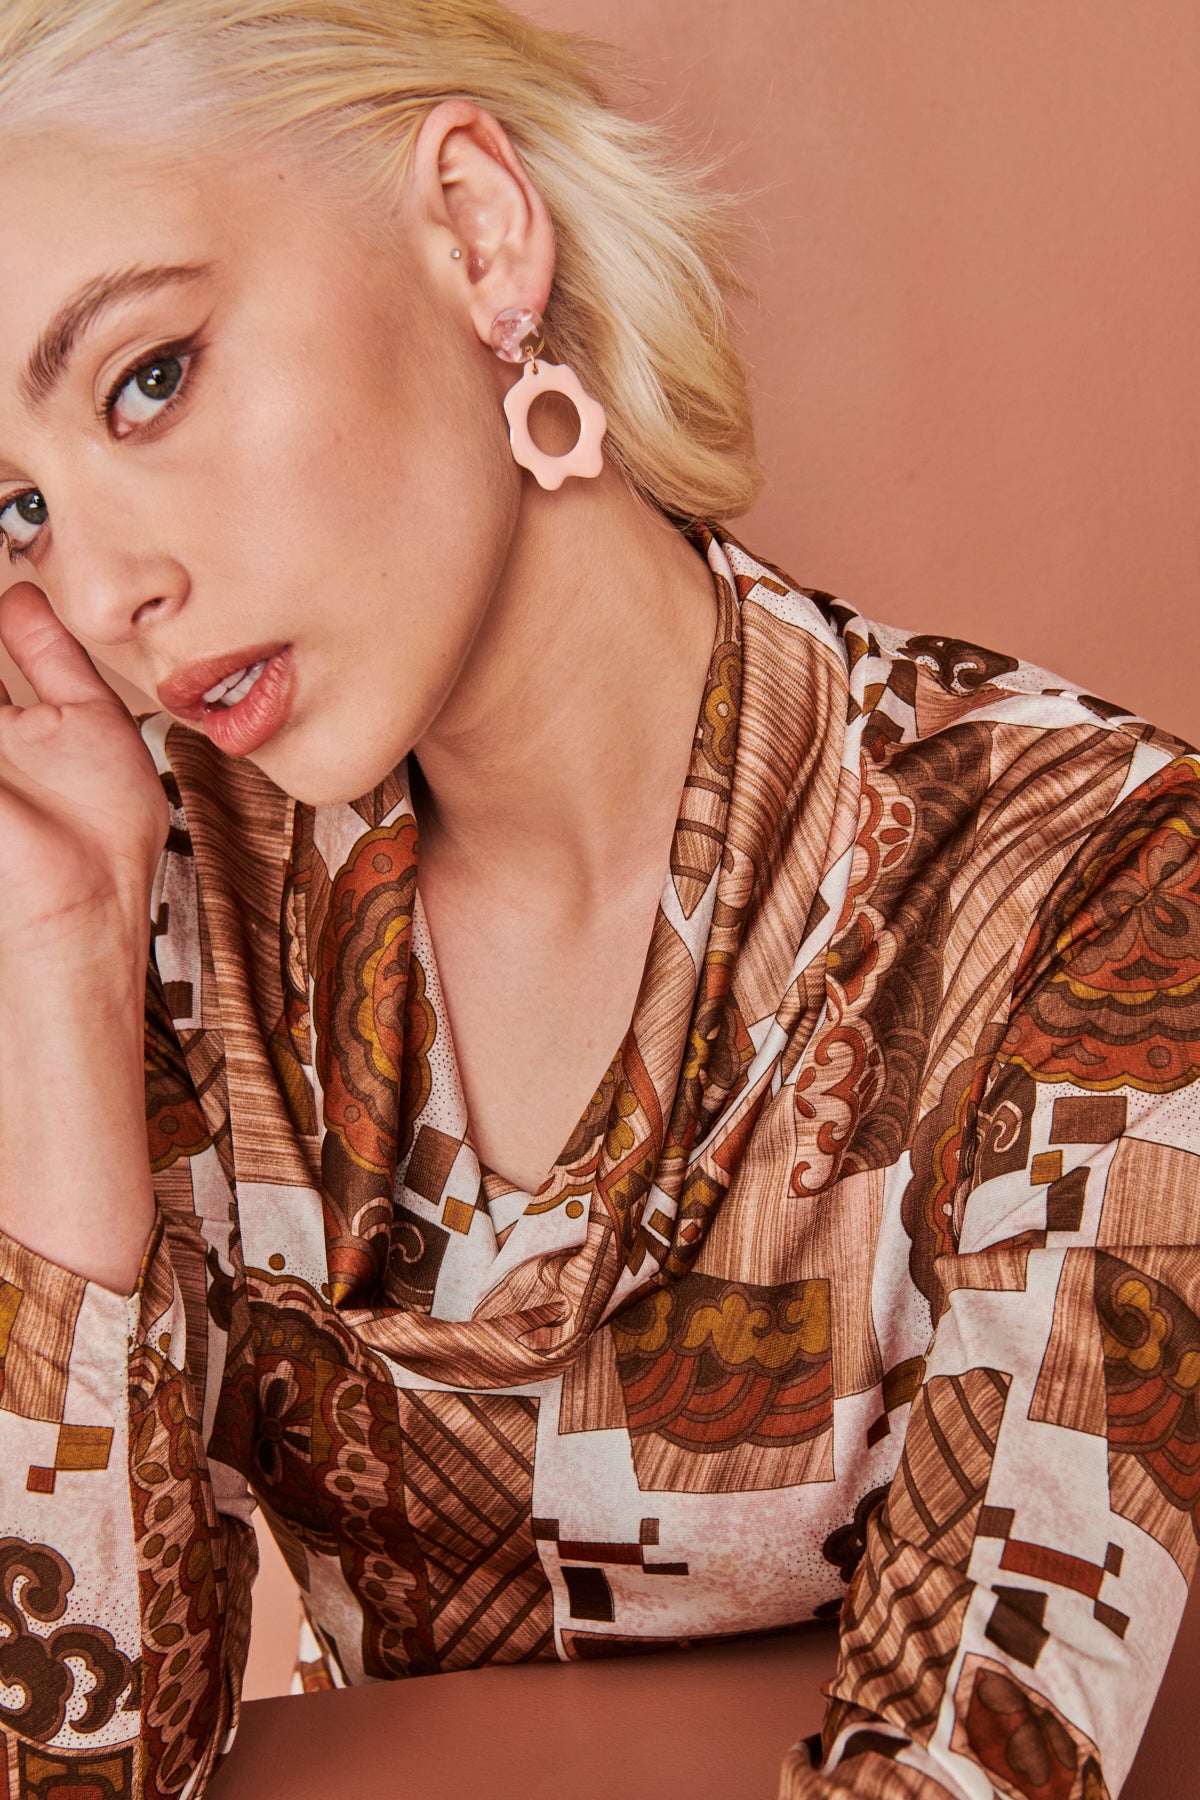 A lady with blonde hair sits against a peach background. She models a side-view of the Floret earrings in marshmellow and wears a brown retro print top with a cowl neckline.